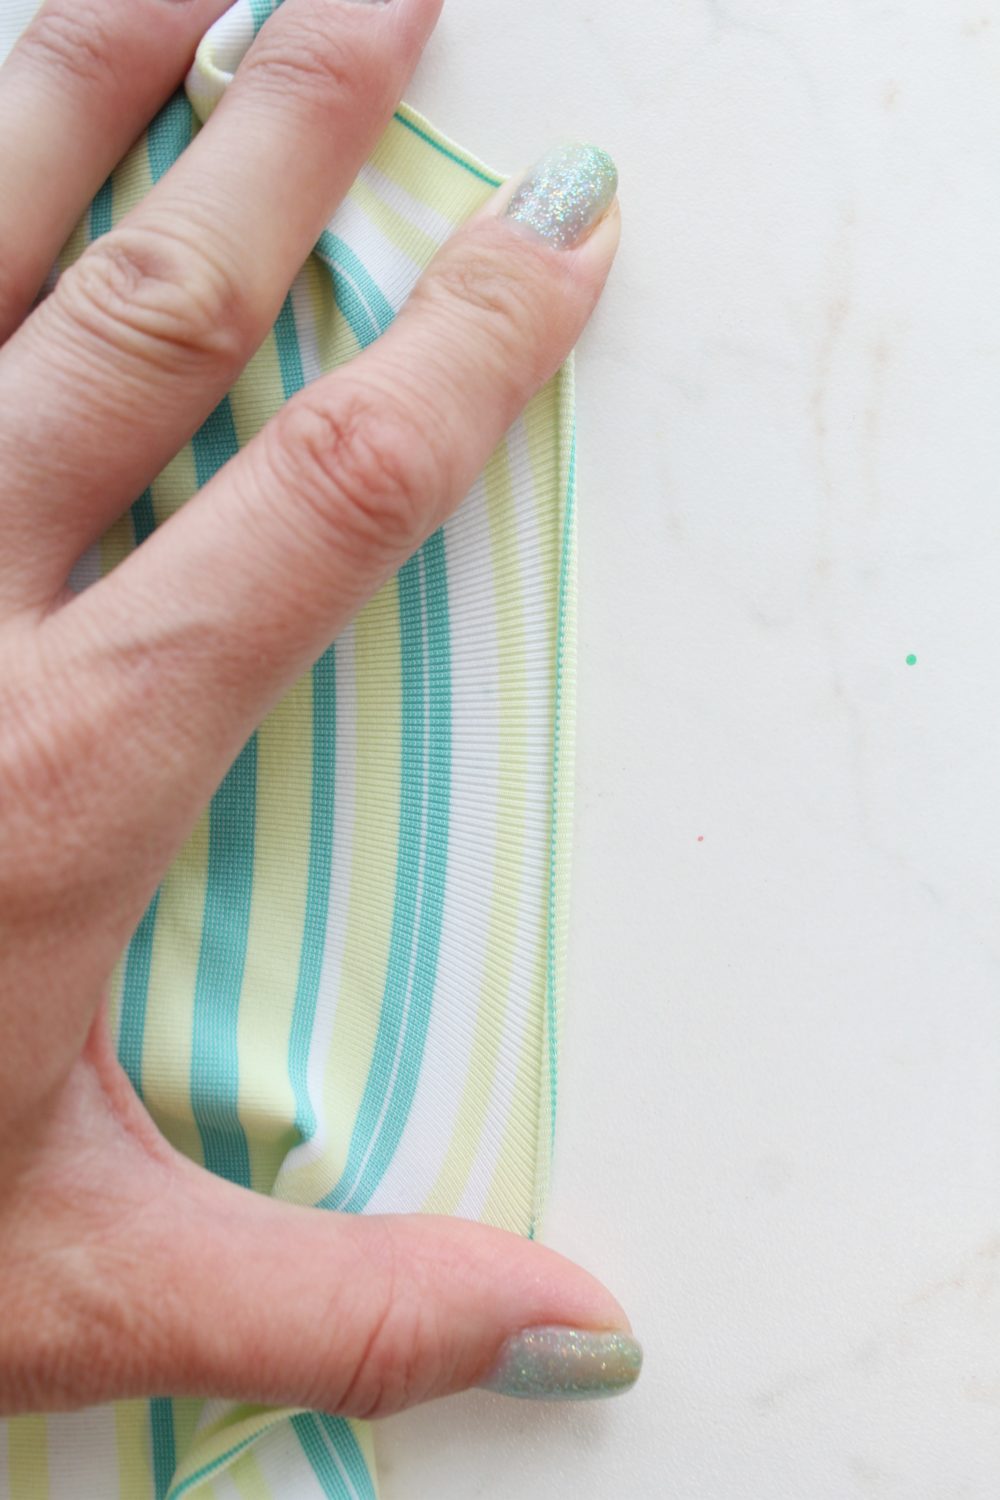 How to Sew a Lettuce Hem, with Video Tutorial - Easy Peasy